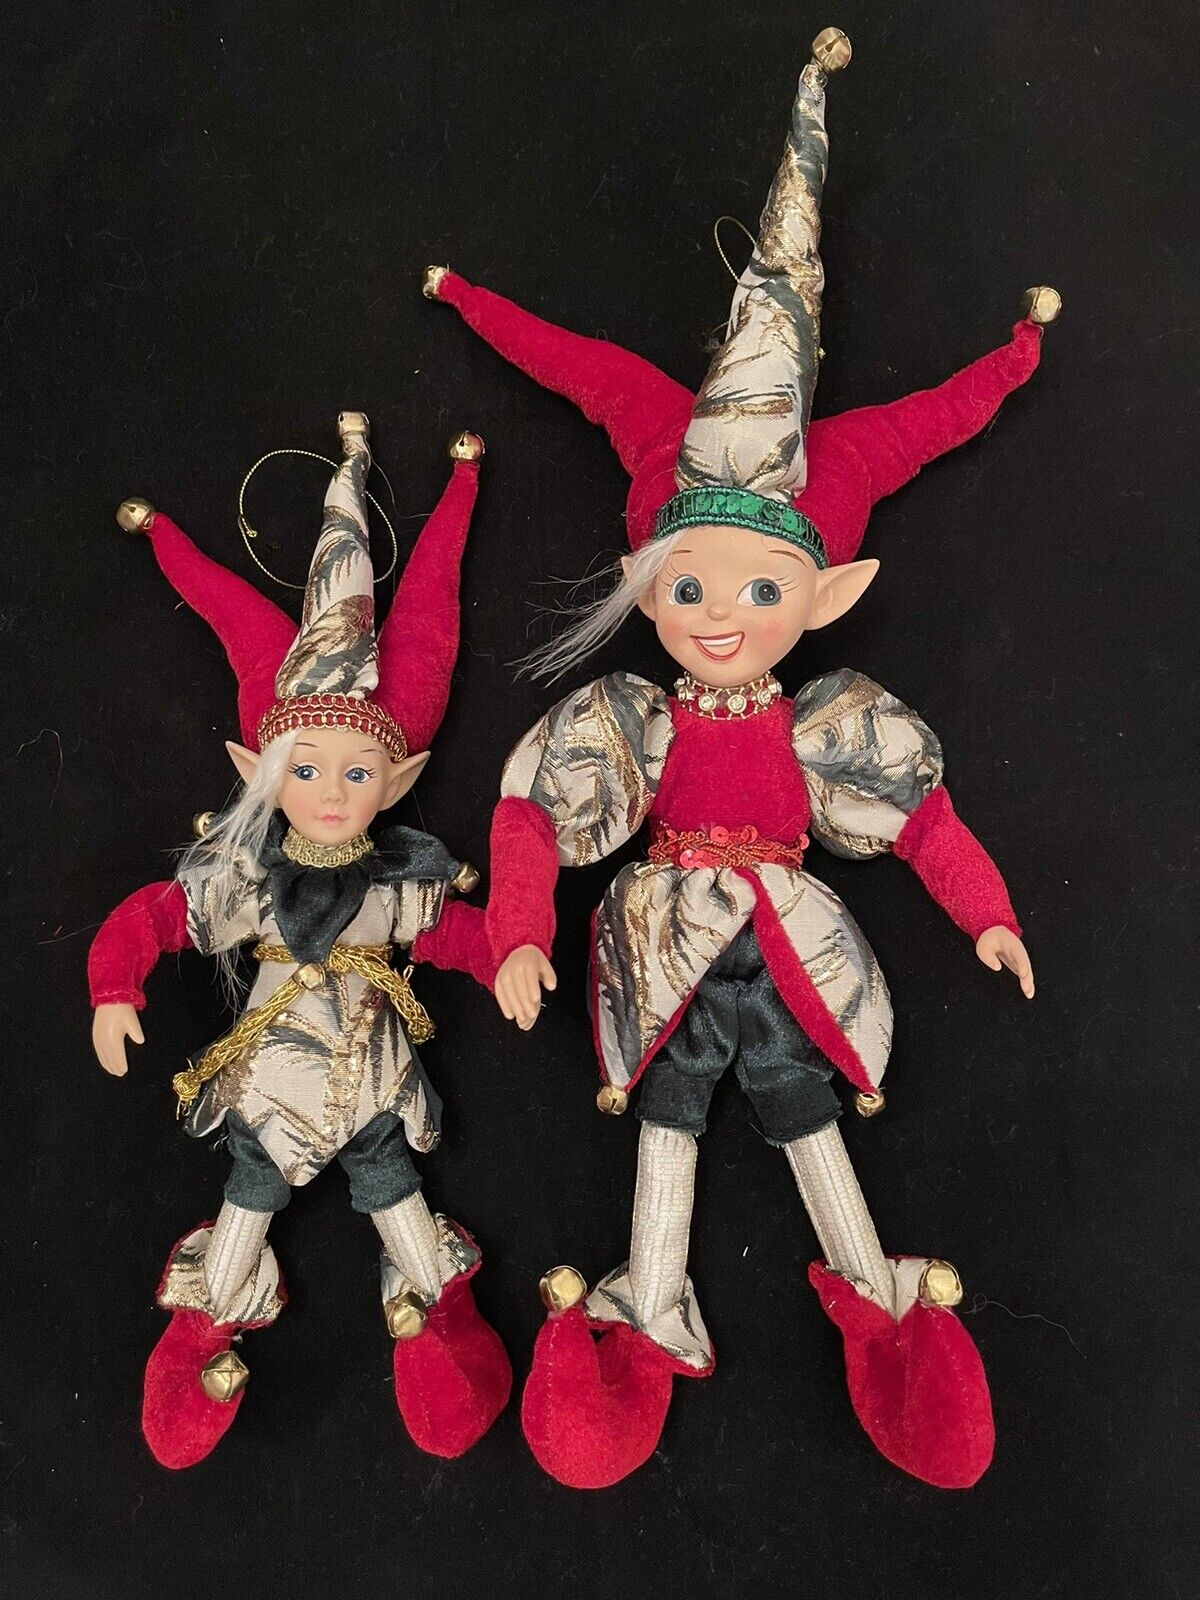 2 PC SET - Christmas Handmade Holiday Posable Elves And Jester Figurines / Dolls